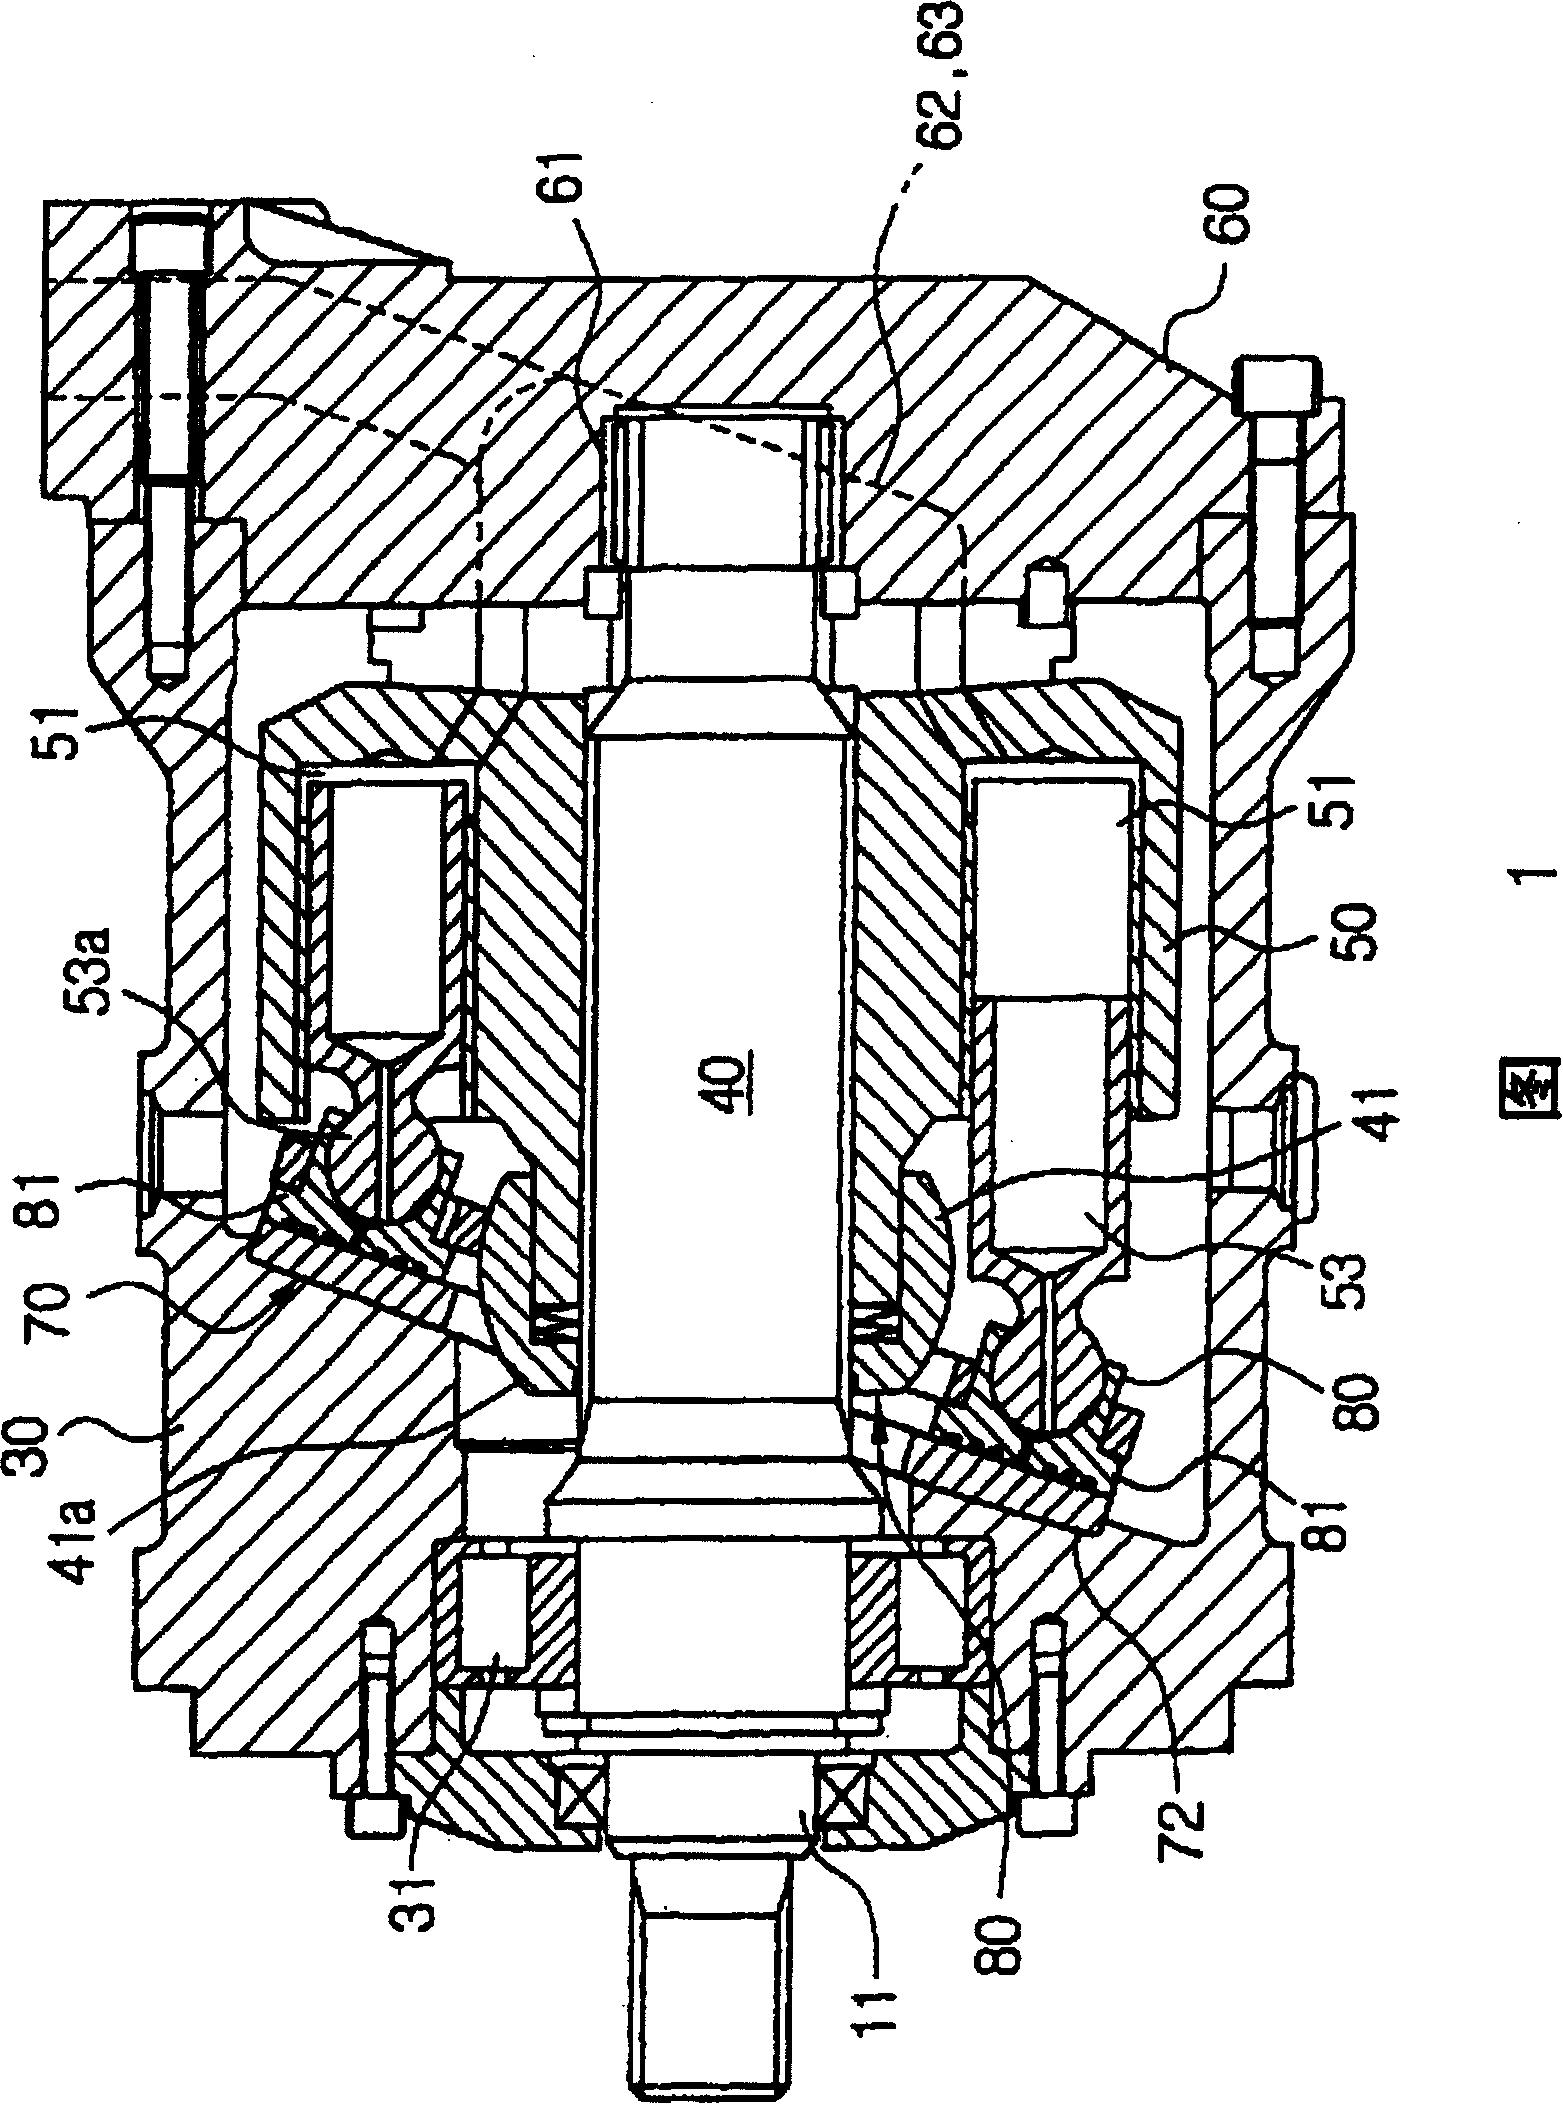 Tilted variable axial piston device